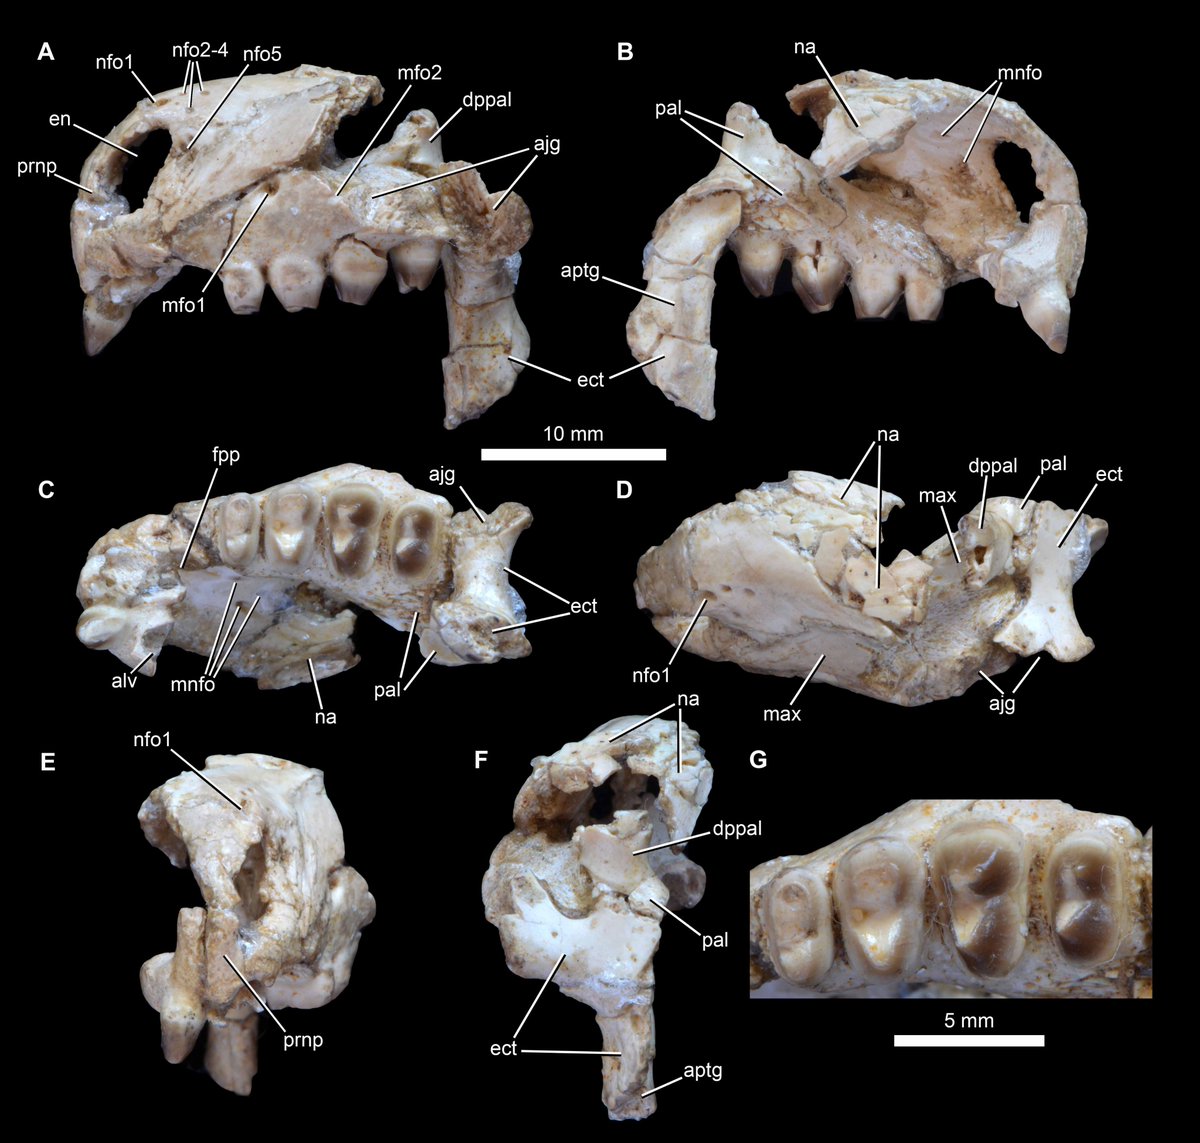 I'm in the field so will post more later, but exciting to see our work on a new procolophonid, Hwiccewyrm trispiculum, from Late Triassic of SW England finally out! Led by myself & @LukeEMeade, with collaboration from @tanytrachelos @TerriCleary & others anatomypubs.onlinelibrary.wiley.com/doi/10.1002/ar…